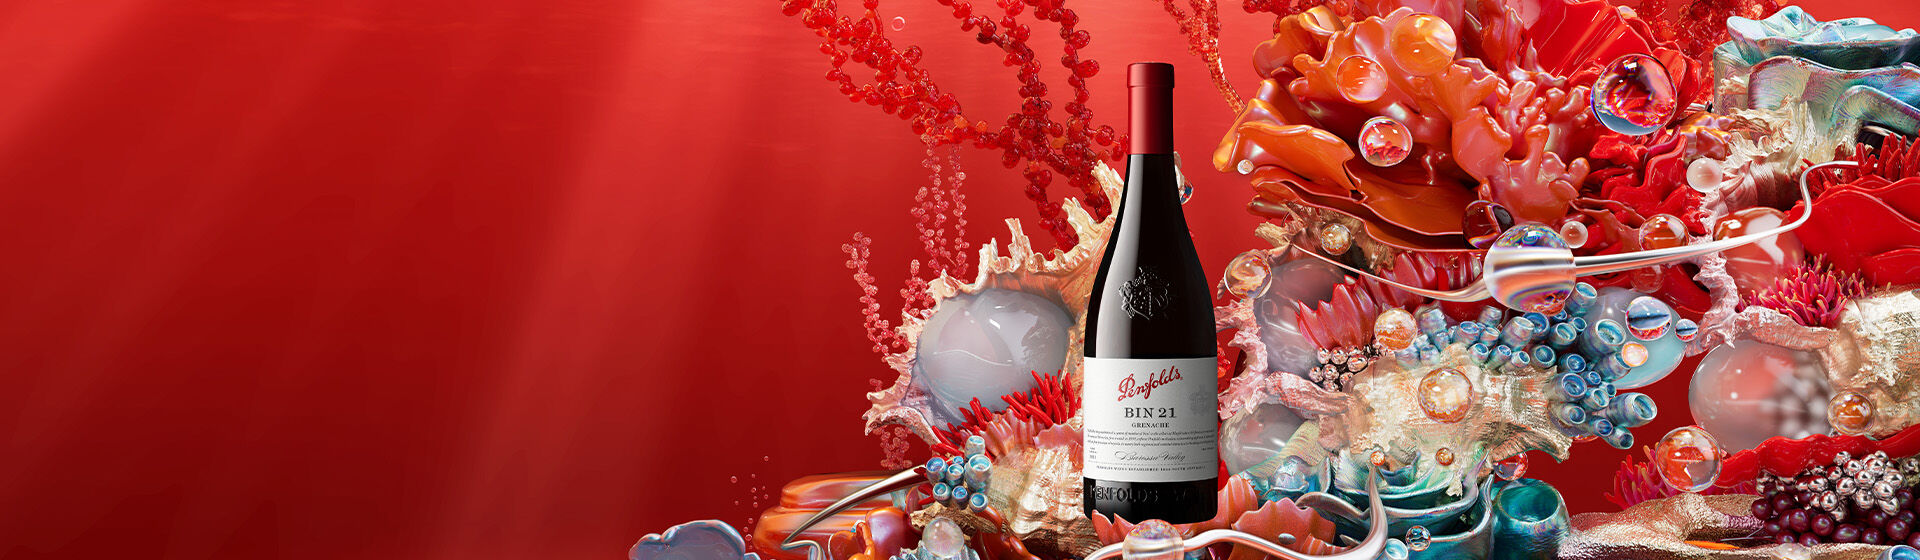 Bin 21 Grenache against red background with coral